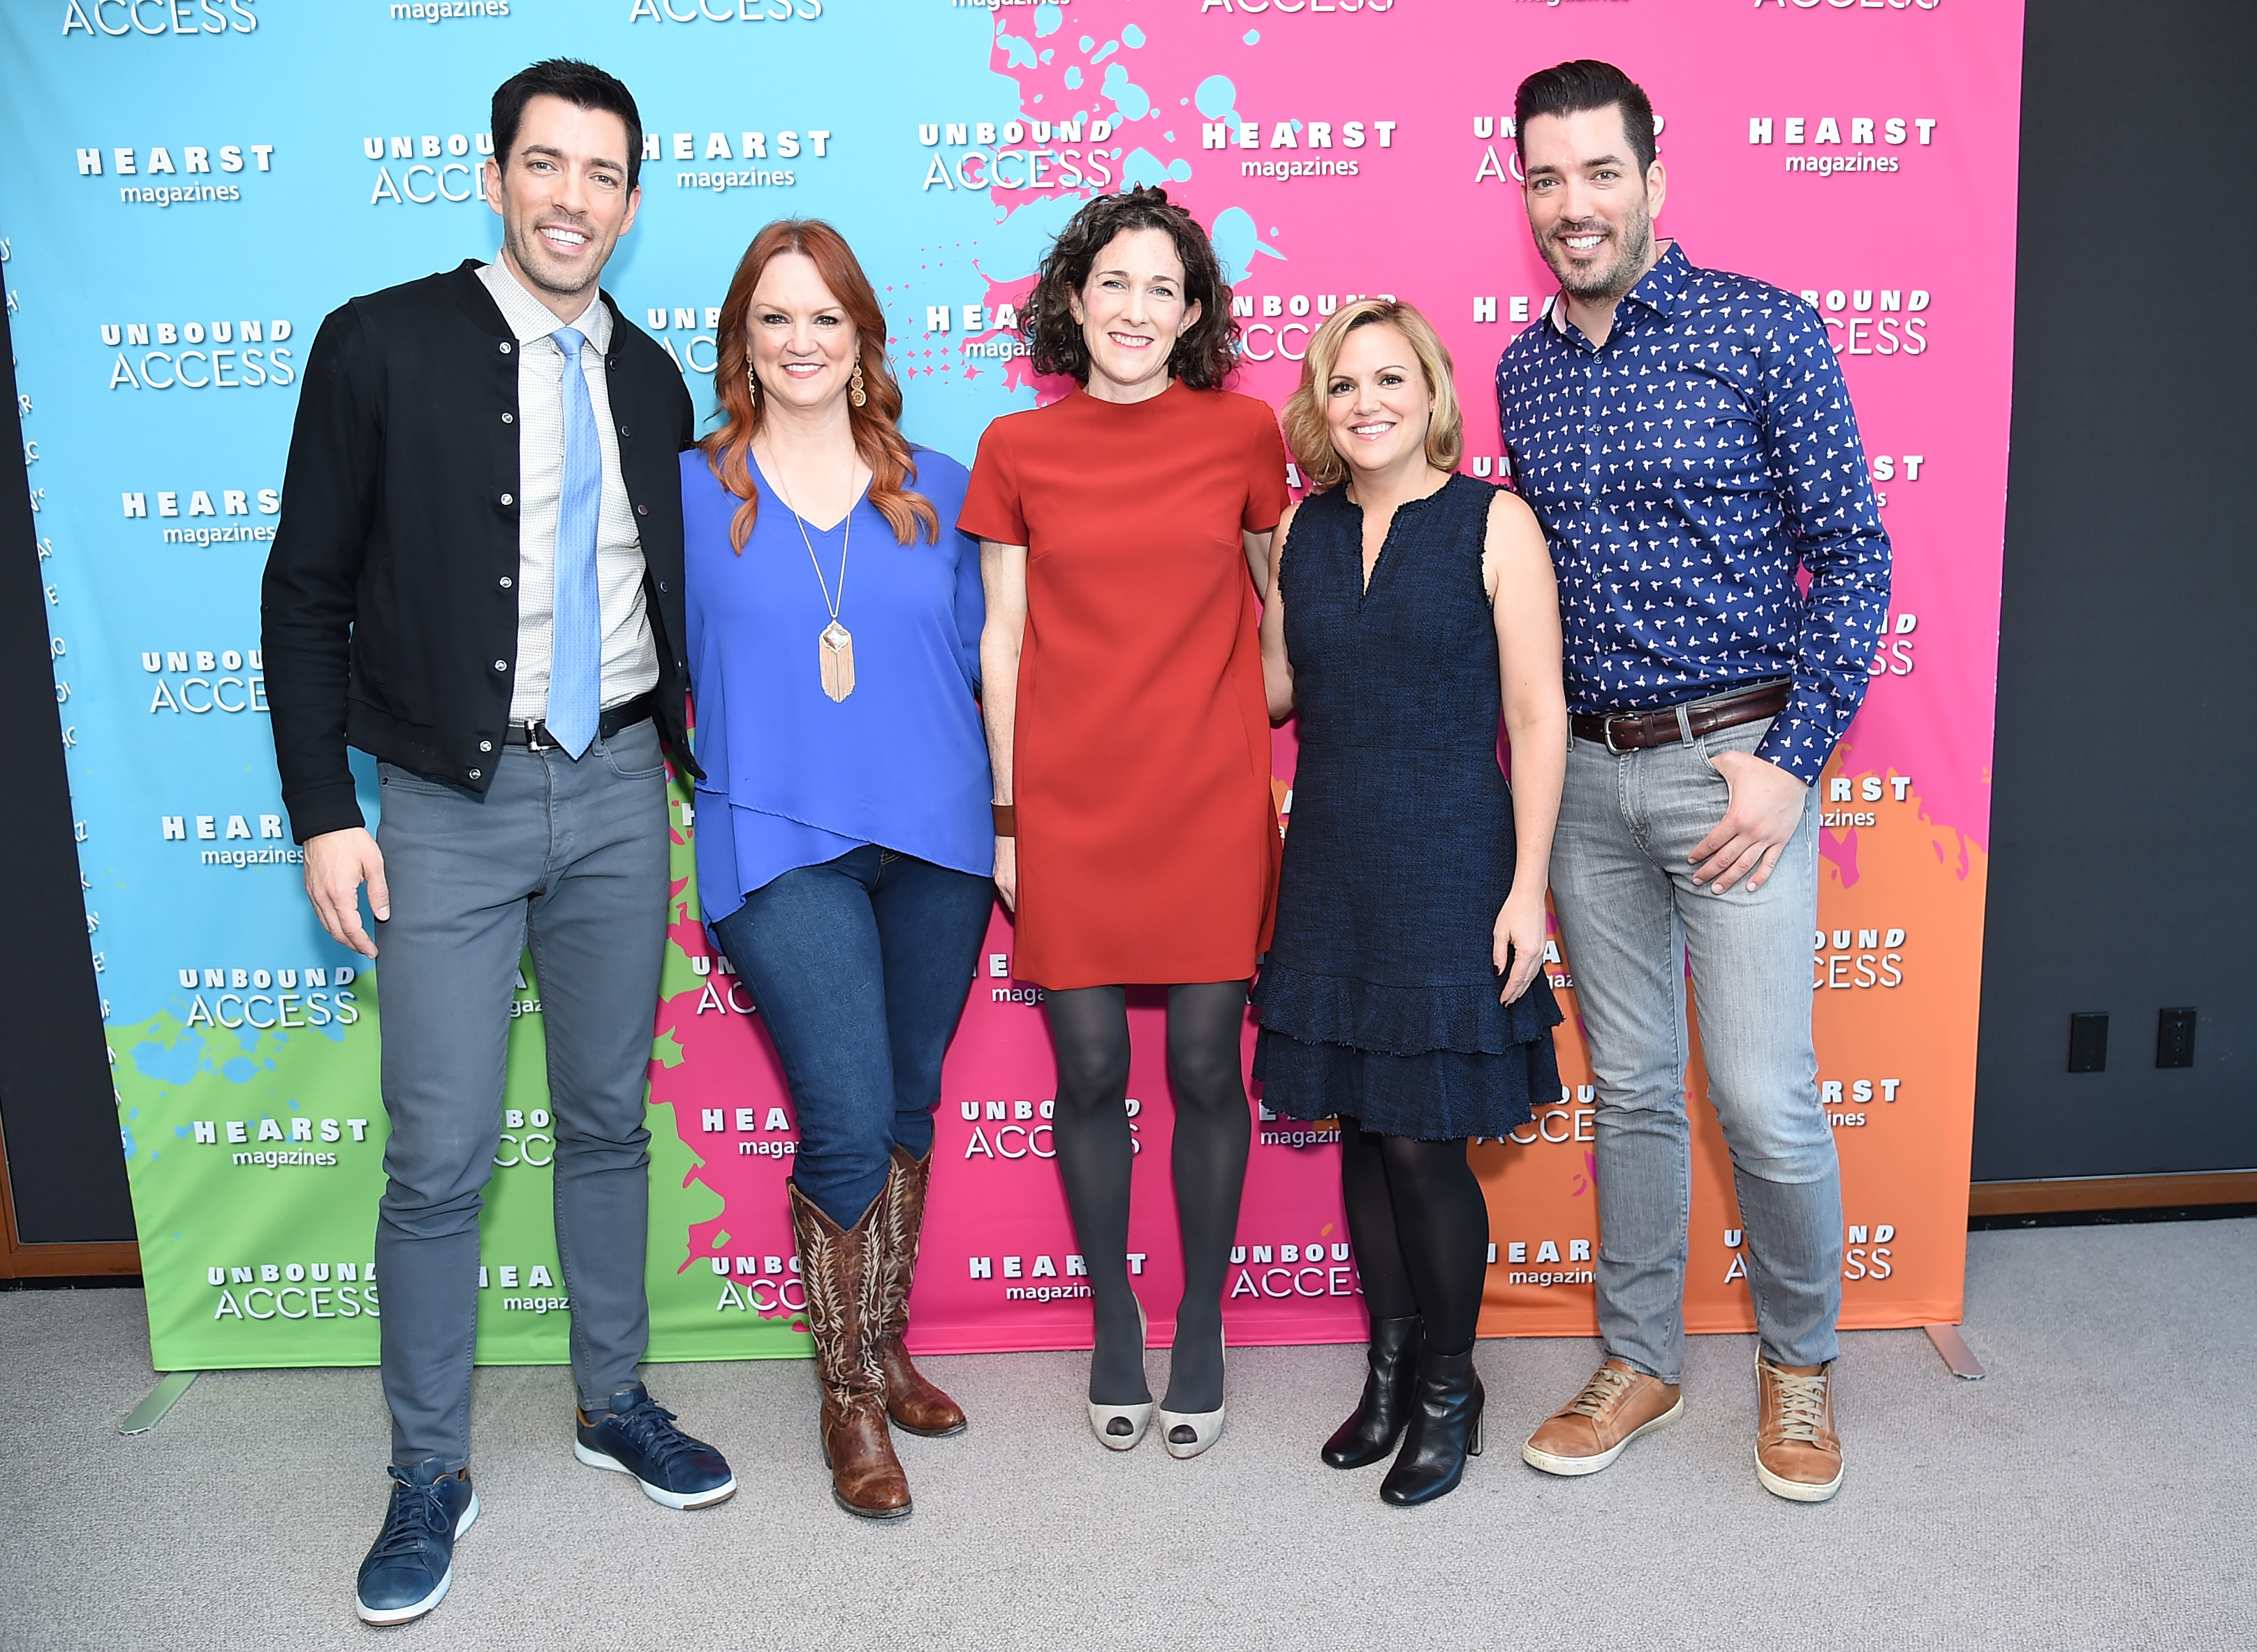 The Pioneer Woman Ree Drummond poses in a blue shirt with the Property Brothers and two others. 